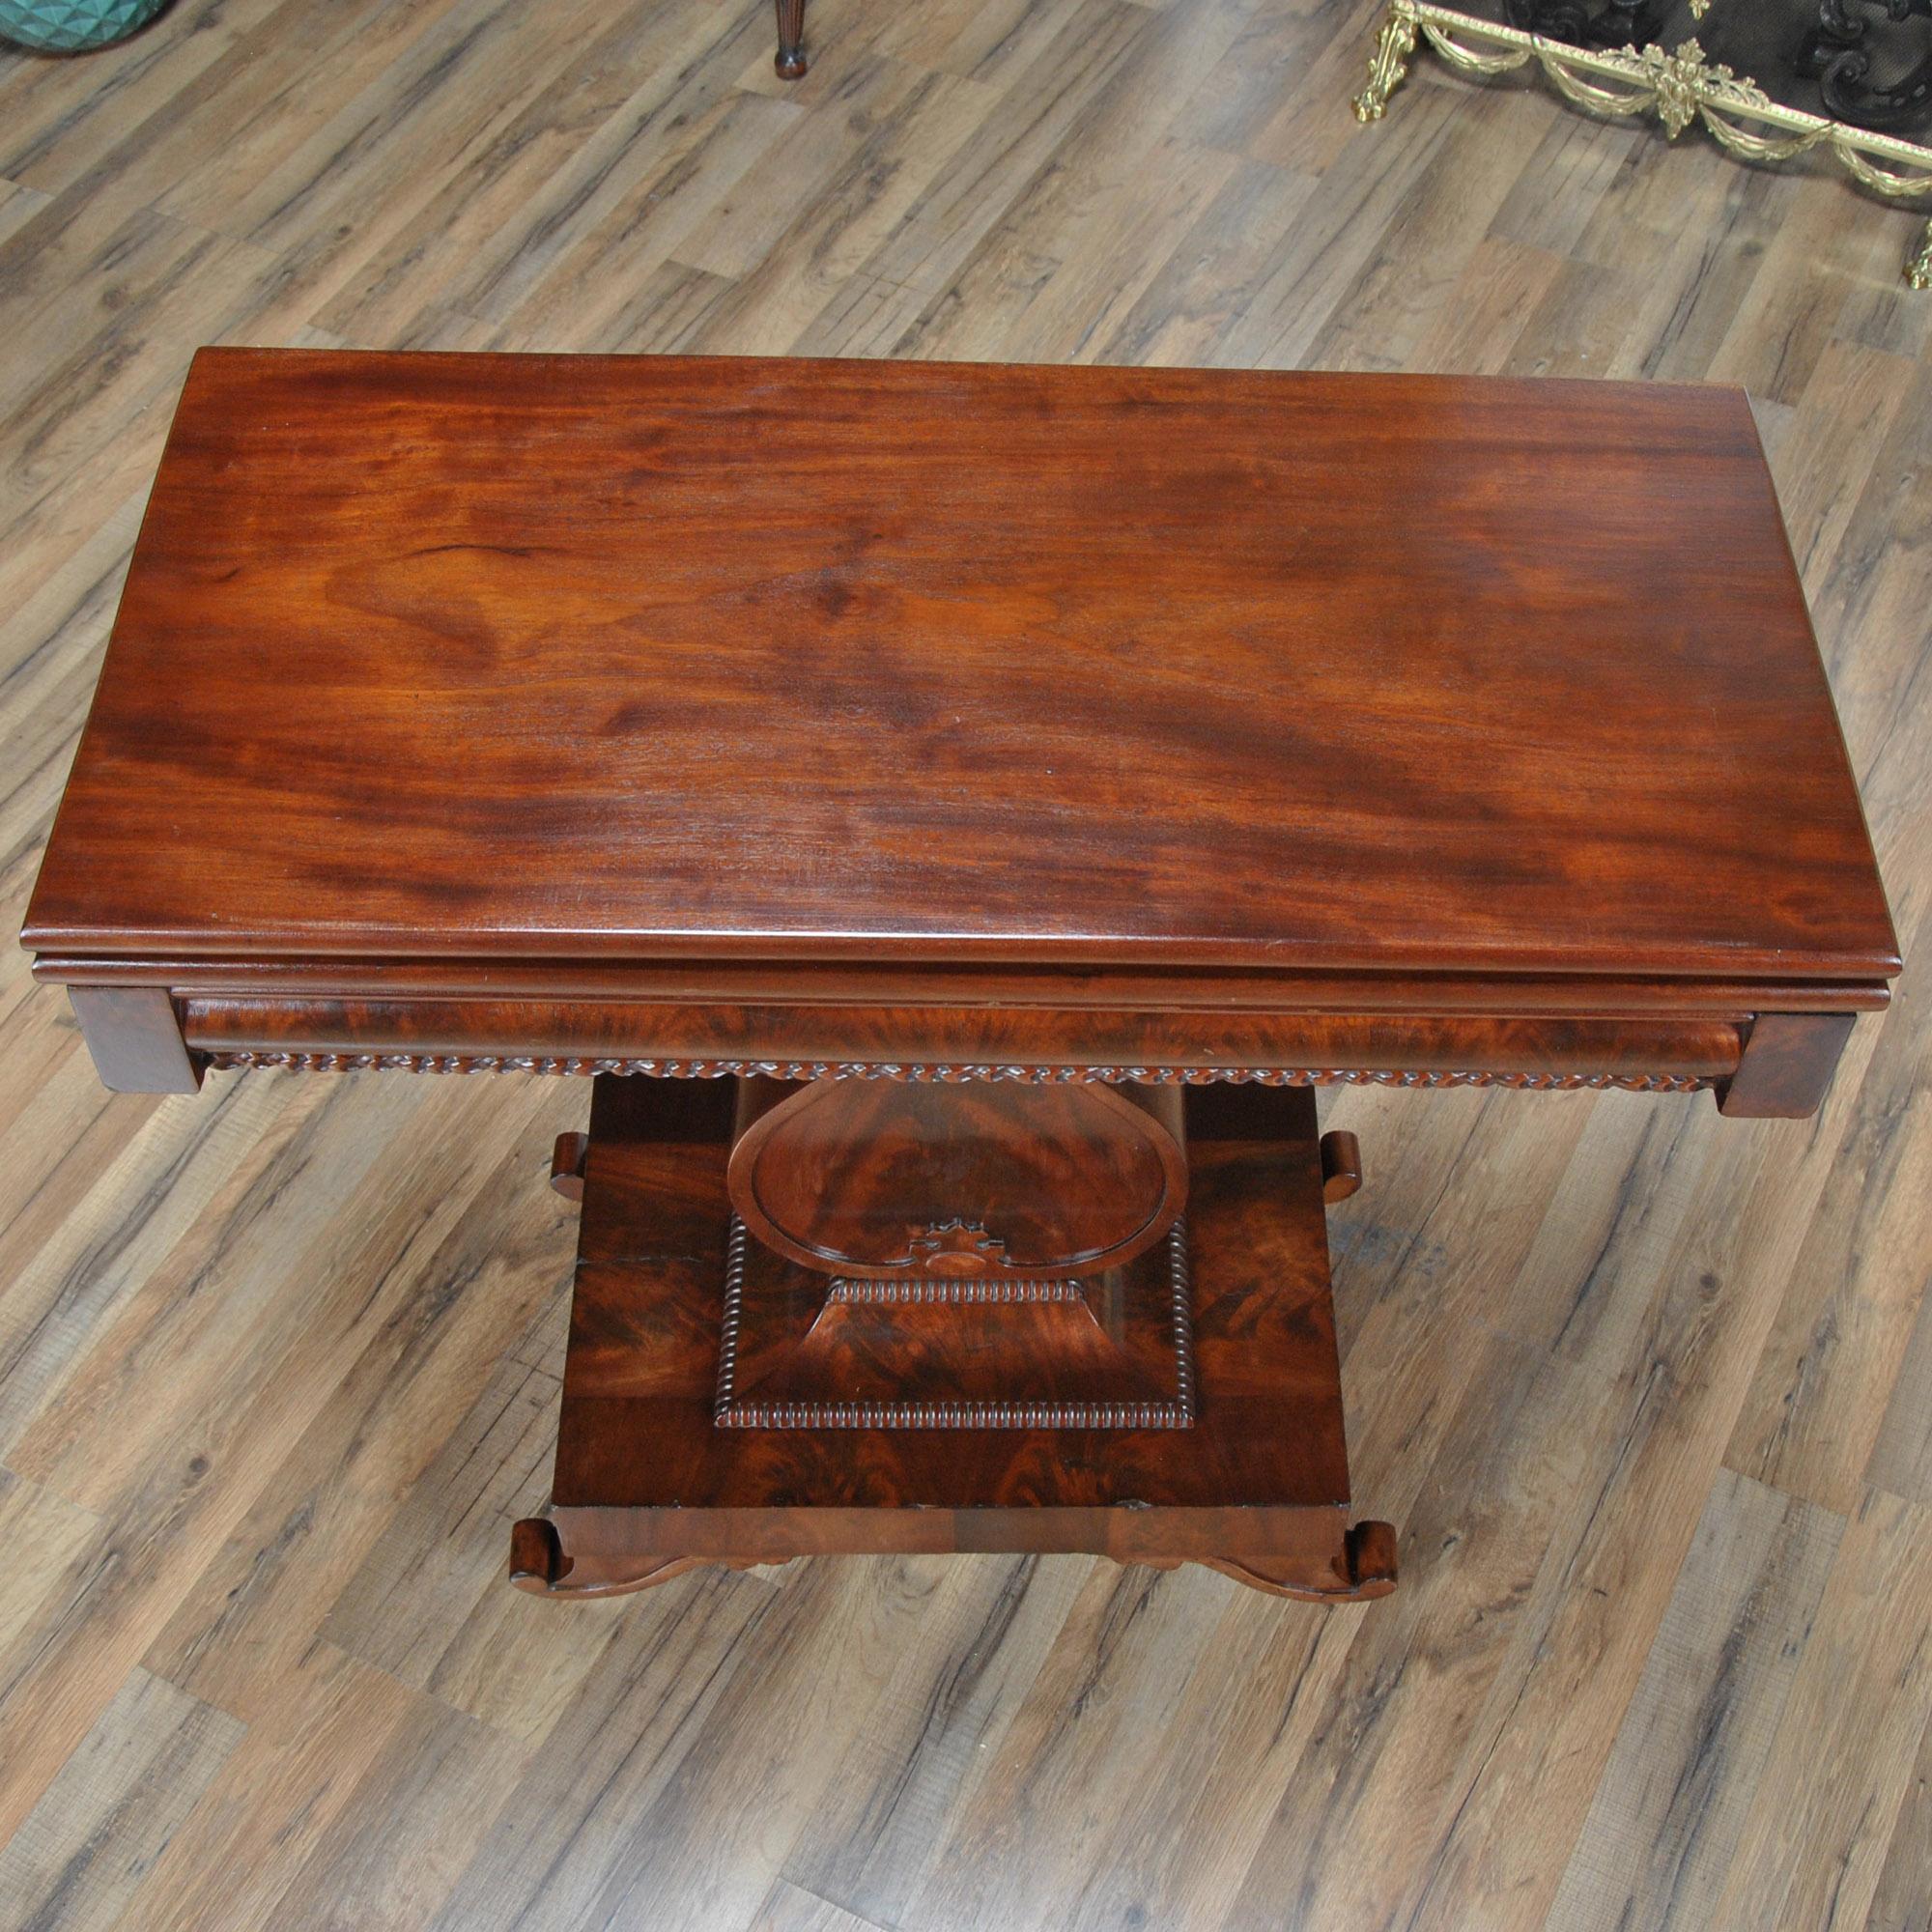 A Vintage Mahogany Neoclassical Game Table. Inspired by a Duncan Phyfe design this high quality game table is both decorative and versatile. The table can be used with the top in the closed position as a hallway or entrance piece, it can also be